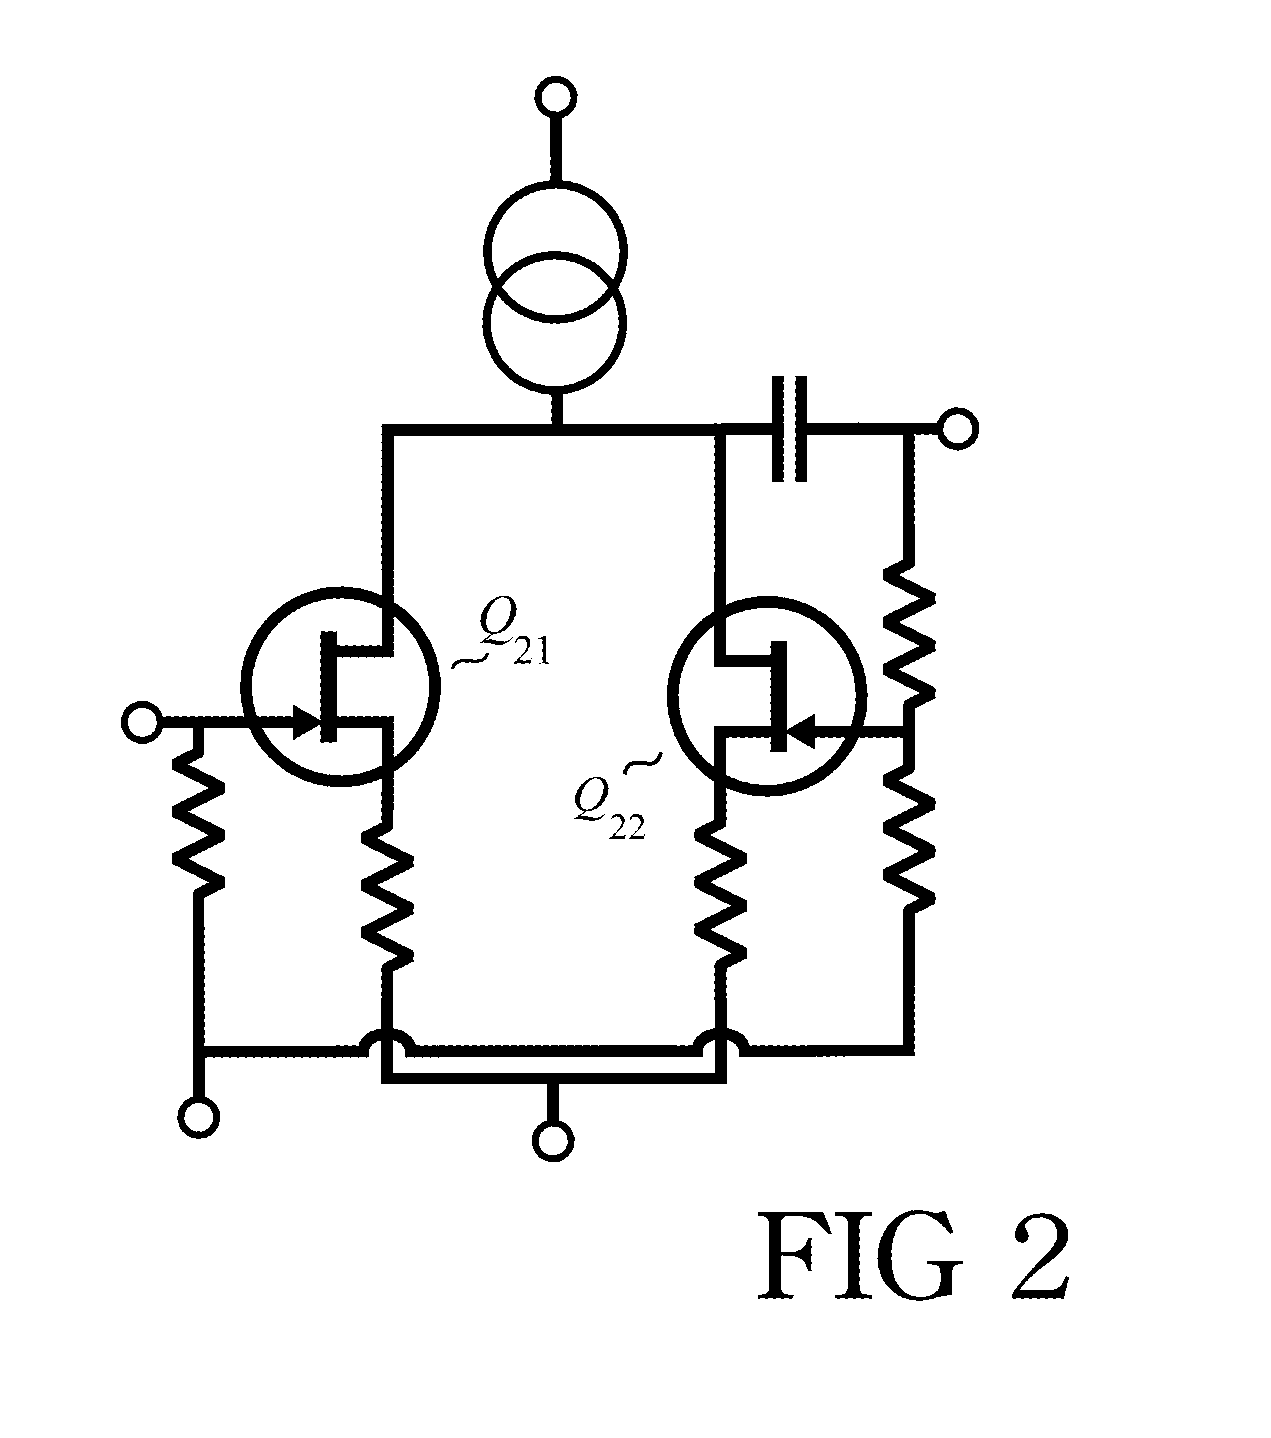 Method for introducing feedback in a FET amplifier